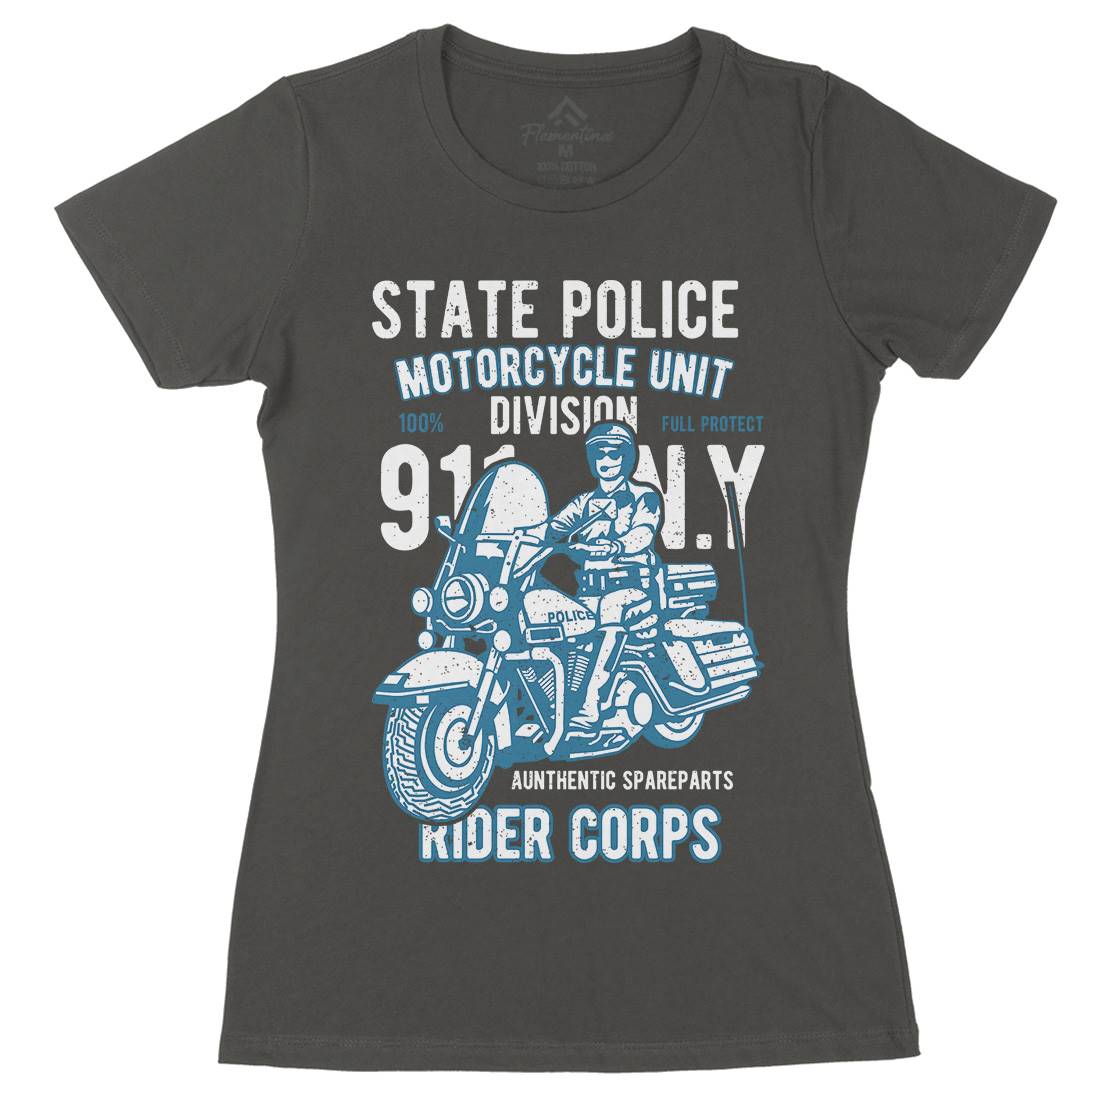 State Police Womens Organic Crew Neck T-Shirt Army A765